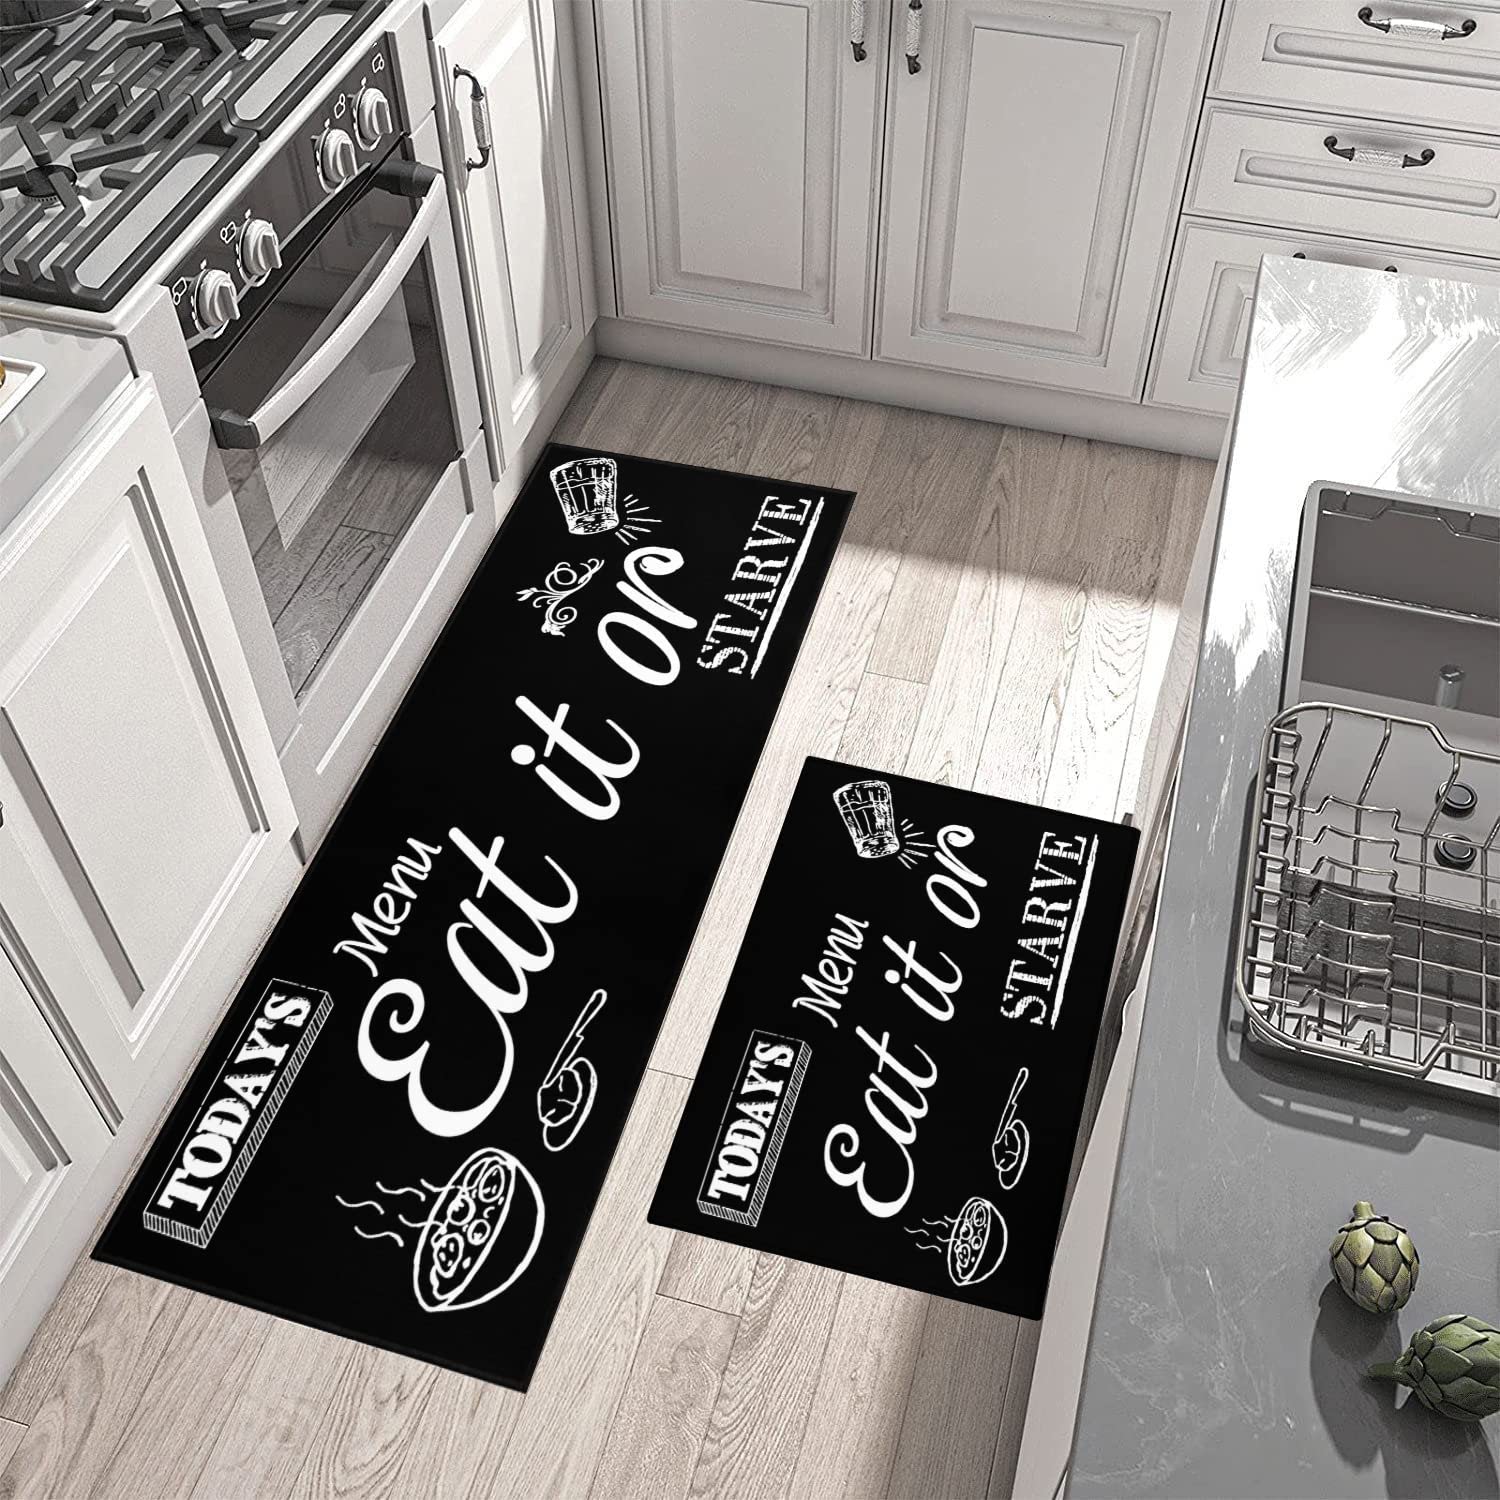 Coffee Kitchen Rugs Set 2 Piece,Kitchen Rugs and Mats Non Skid Washable Runner,Farmhouse Kitchen Sink Rugs Seasonal Holiday Party Low-Profile Mats for Home Kitchen(Brown 17"x48"+17"x24") - image 3 of 6